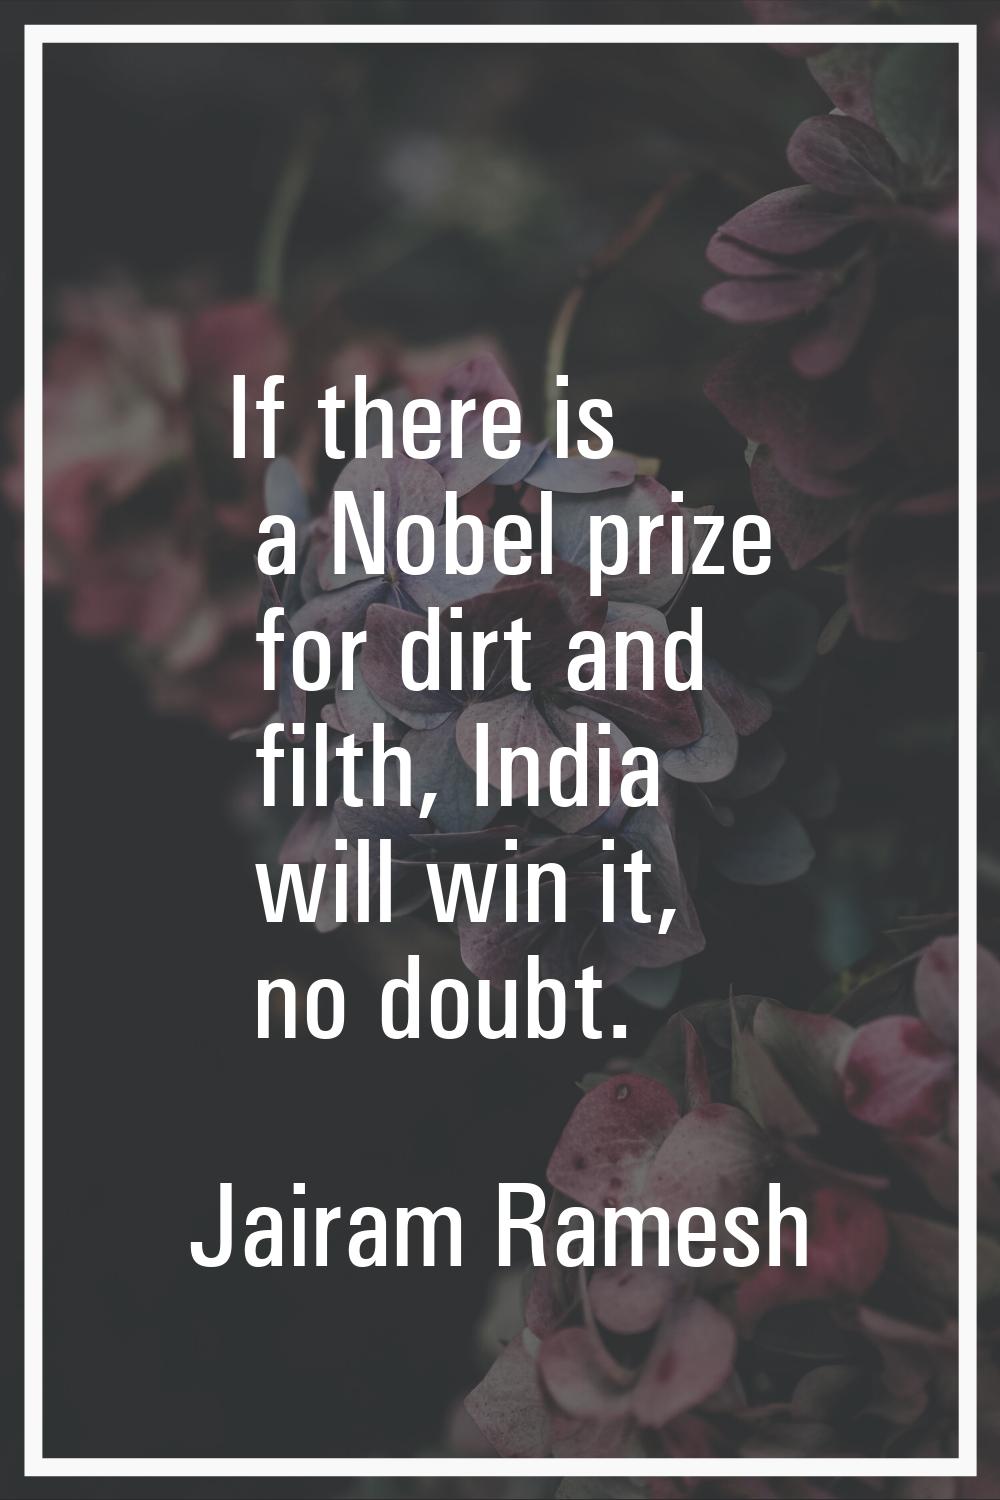 If there is a Nobel prize for dirt and filth, India will win it, no doubt.